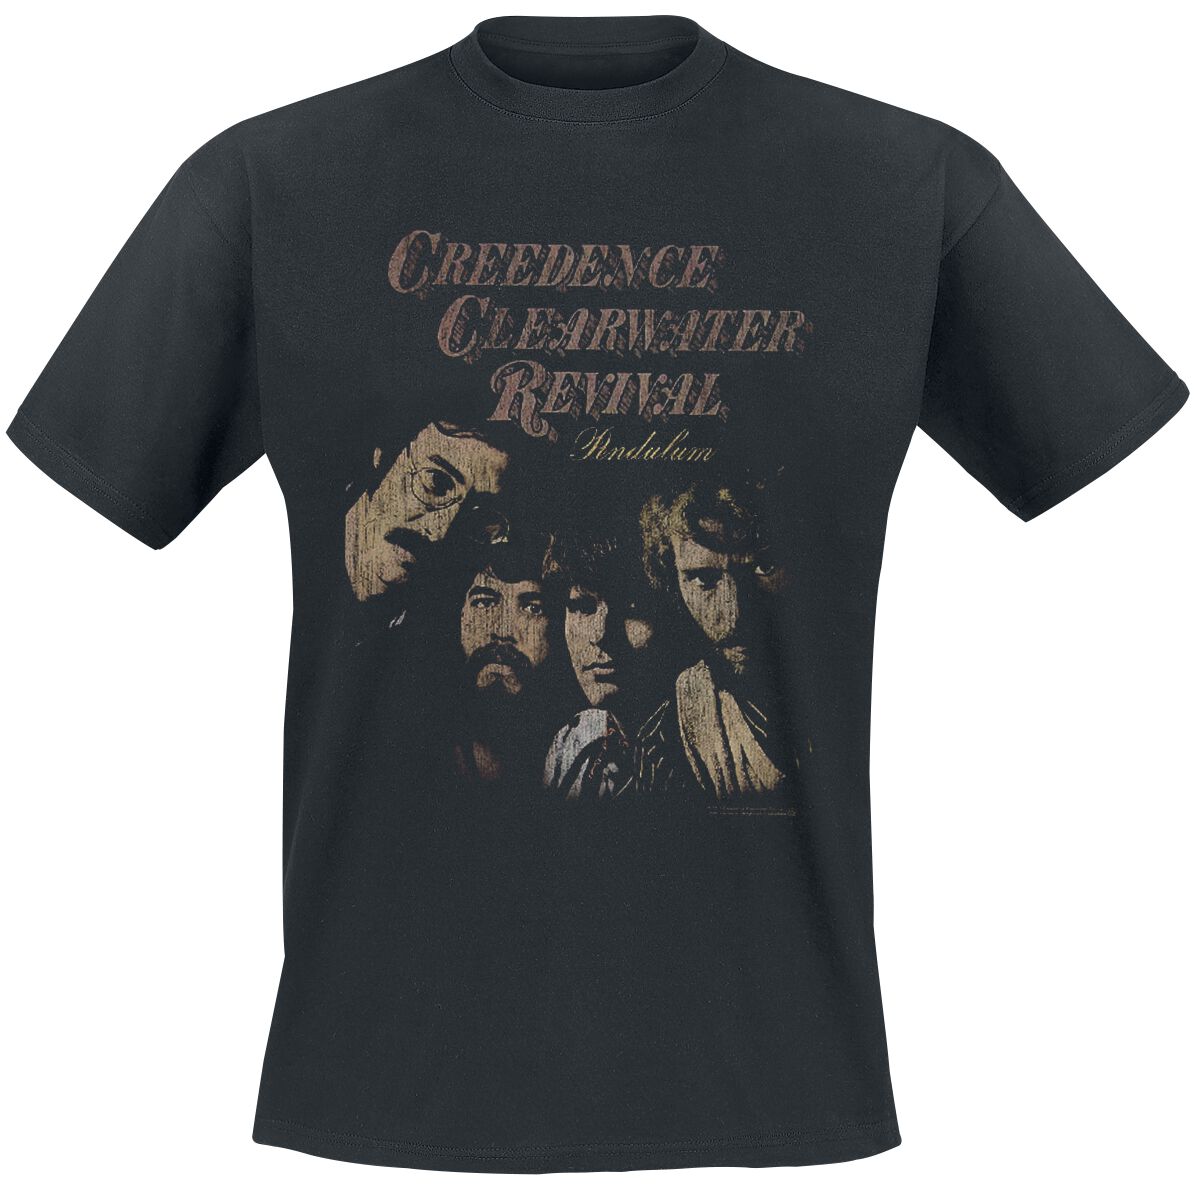 Image of Creedence Clearwater Revival (CCR) Pendulum T-Shirt schwarz